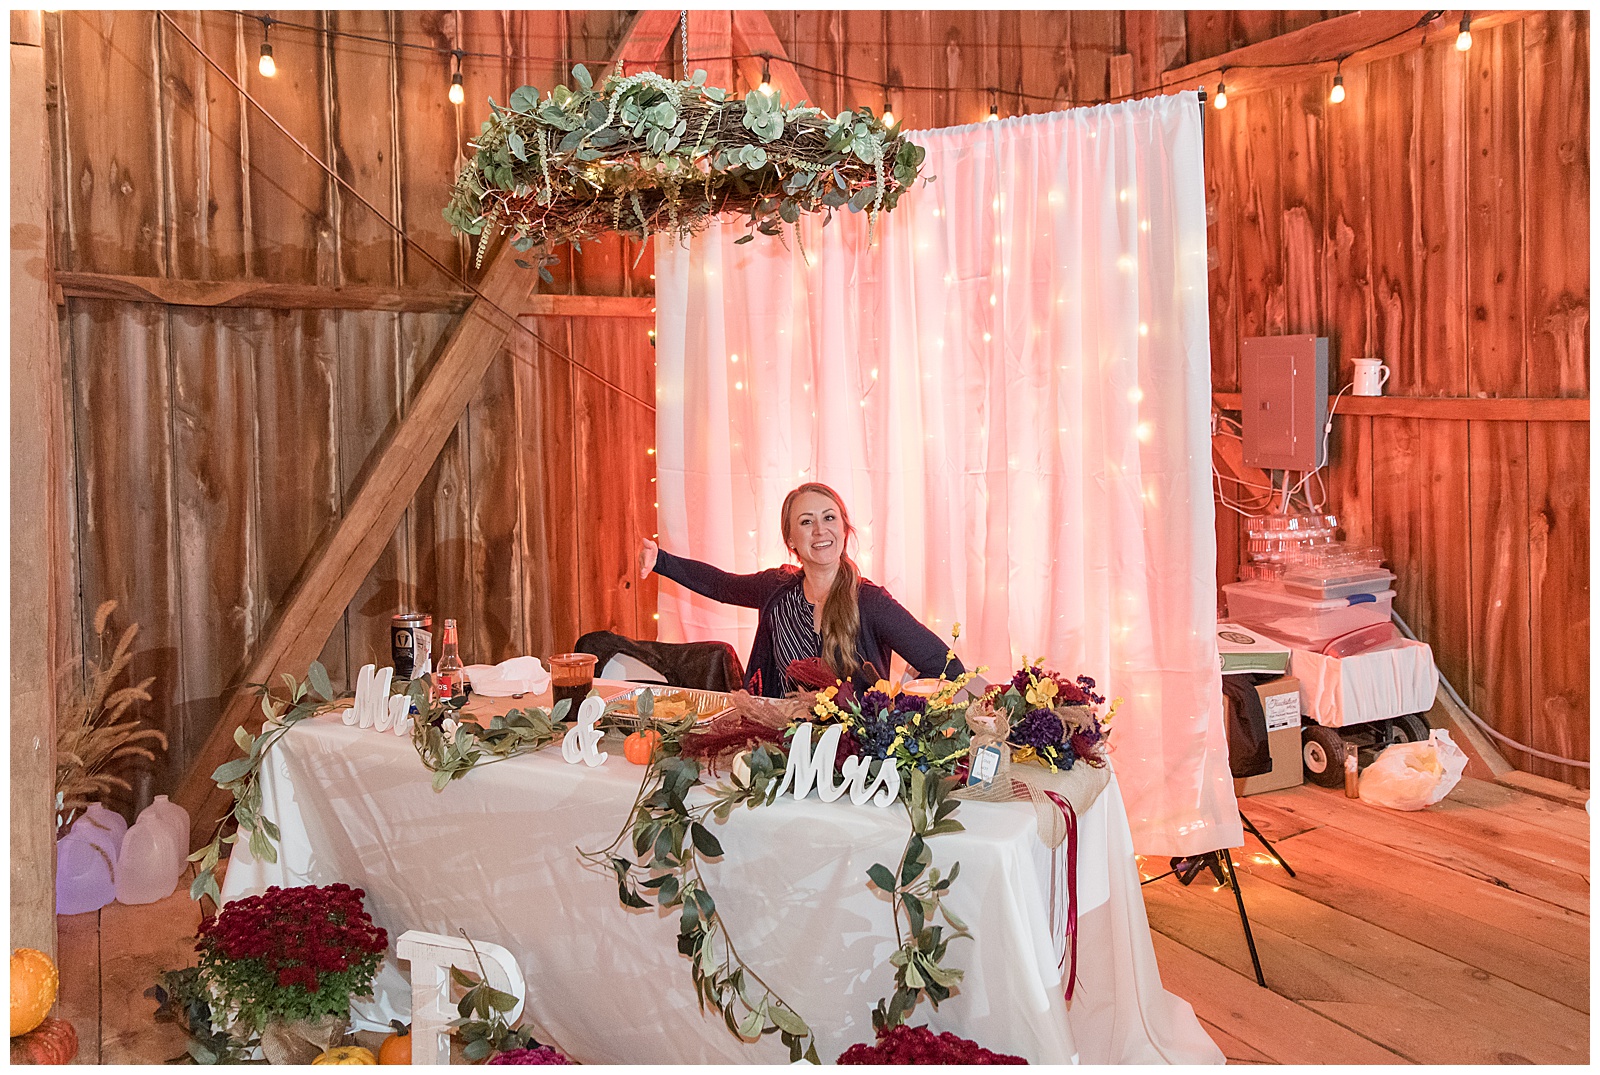 photographer sitting behind table prepared for bride and groom for reception and smiling for camera as they take photos before reception begins with white backdrop and large floral display overhead